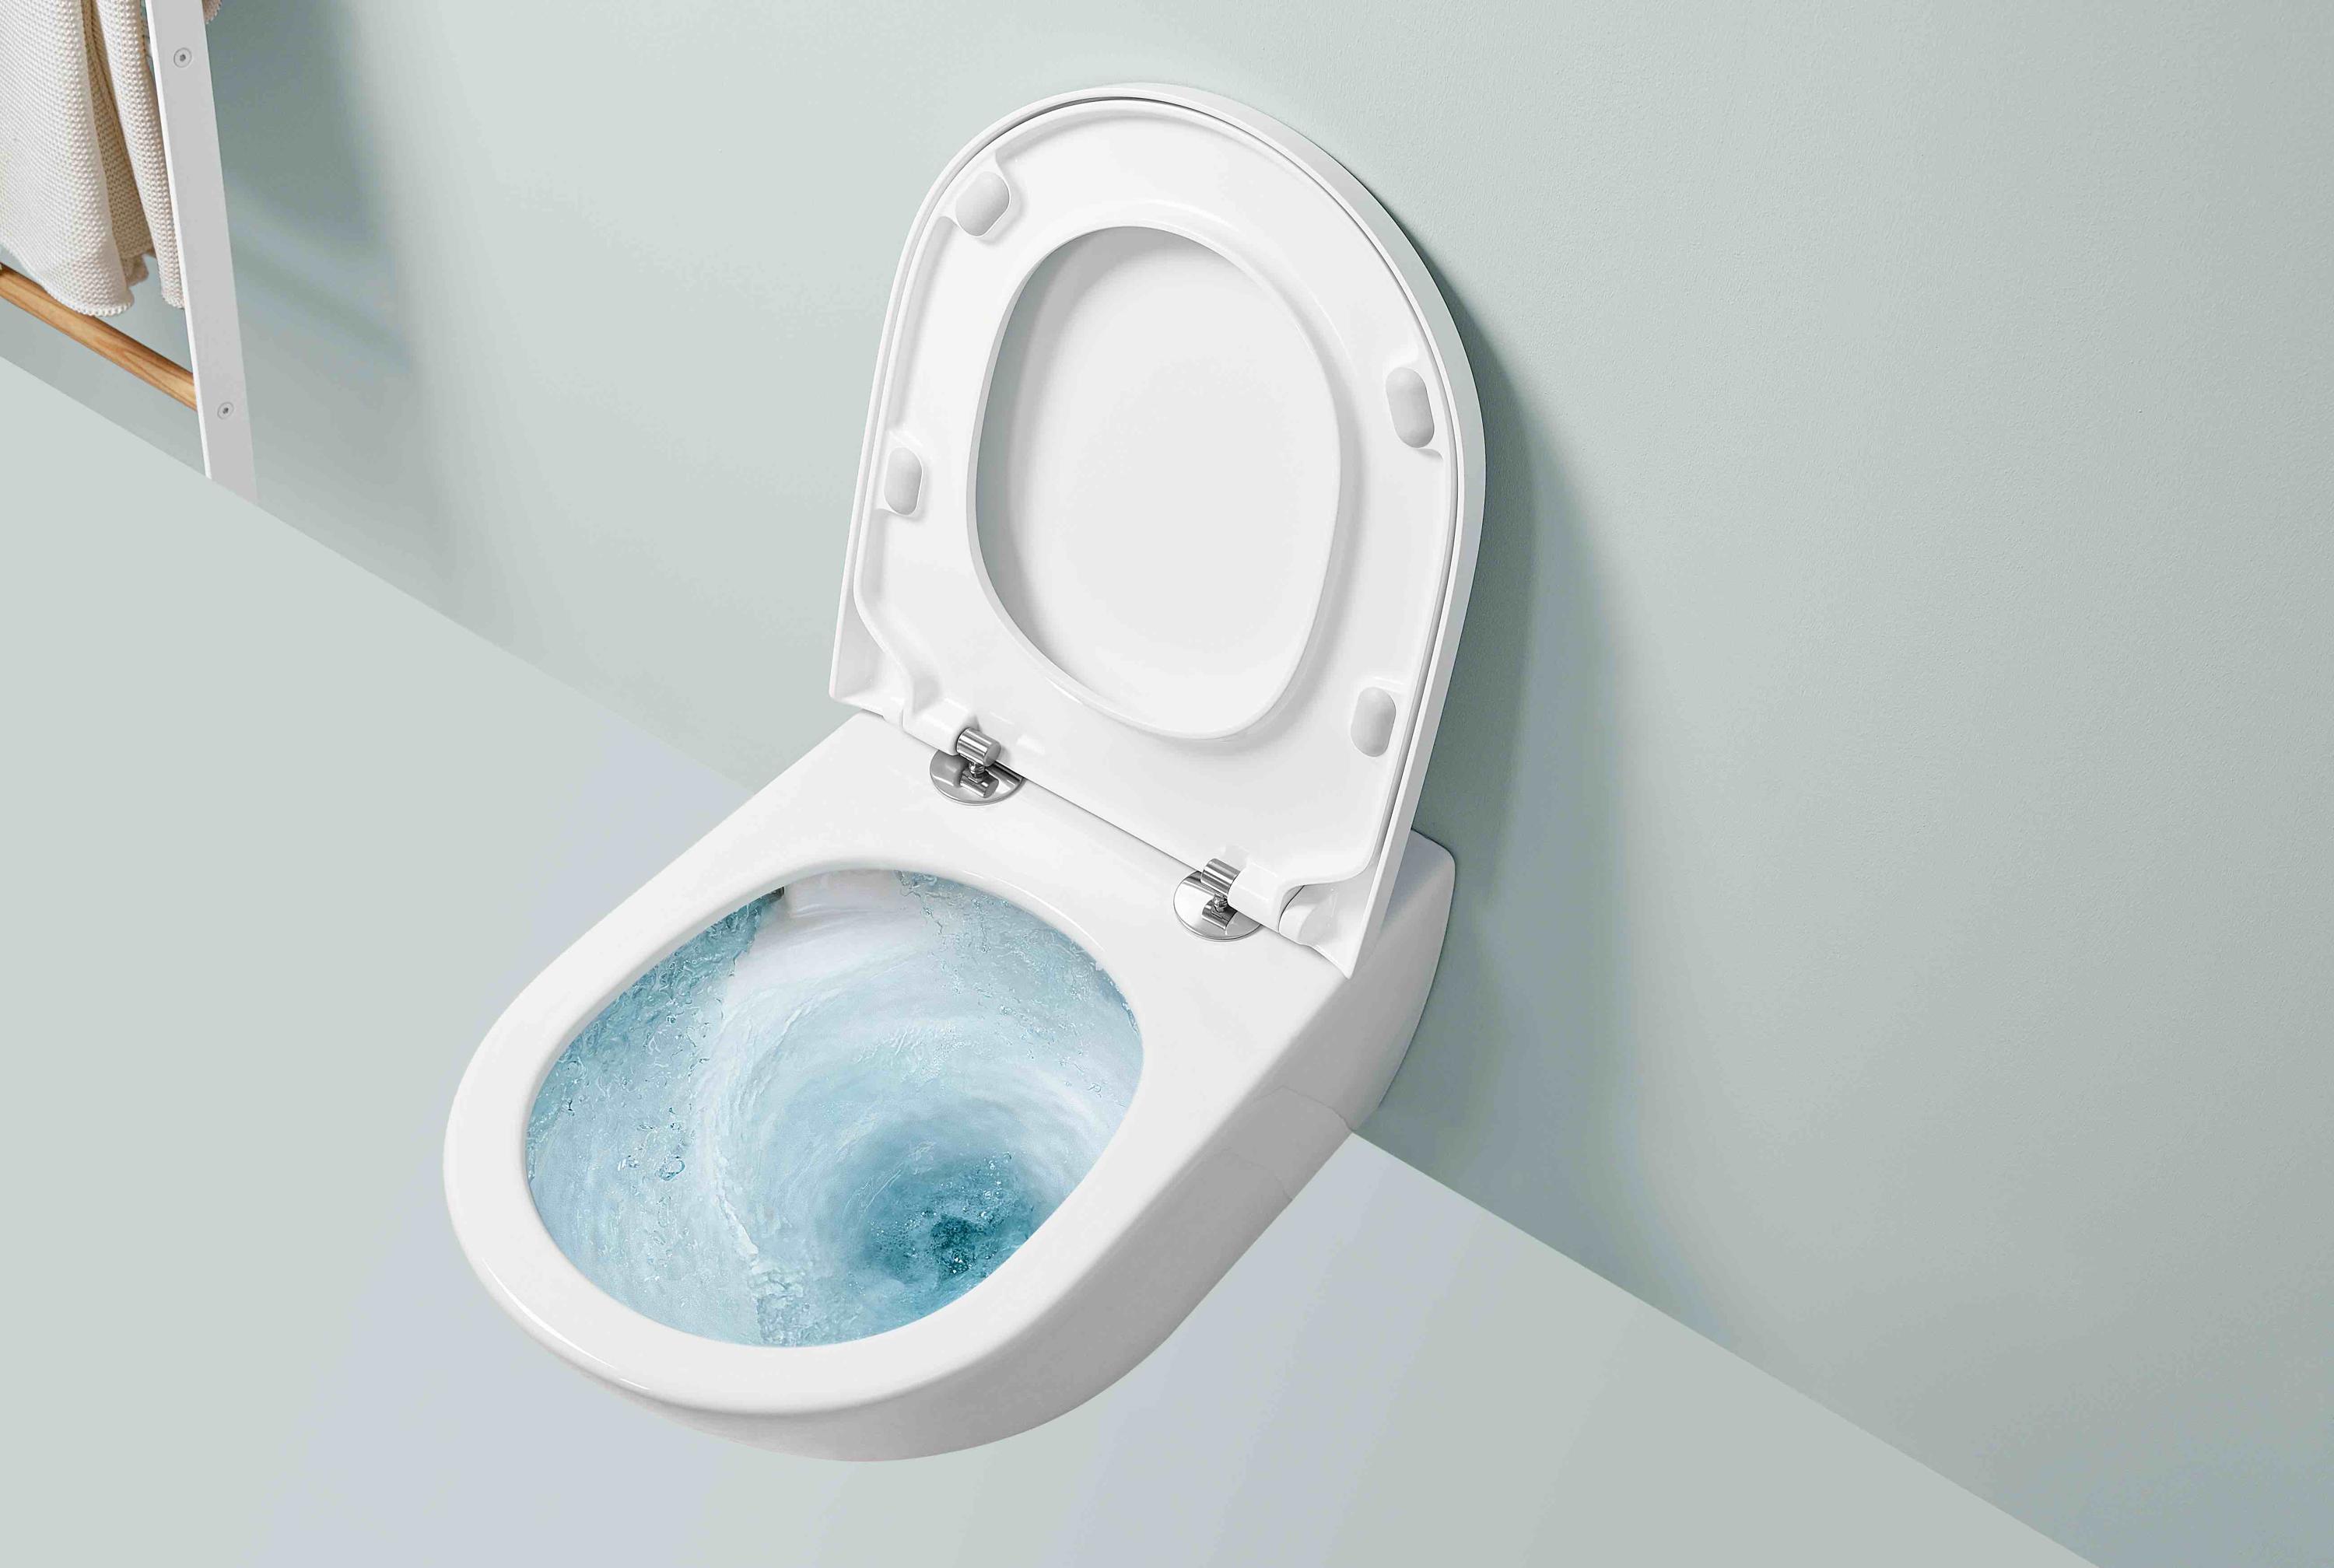 I. Introduction to Green Toilet Technology